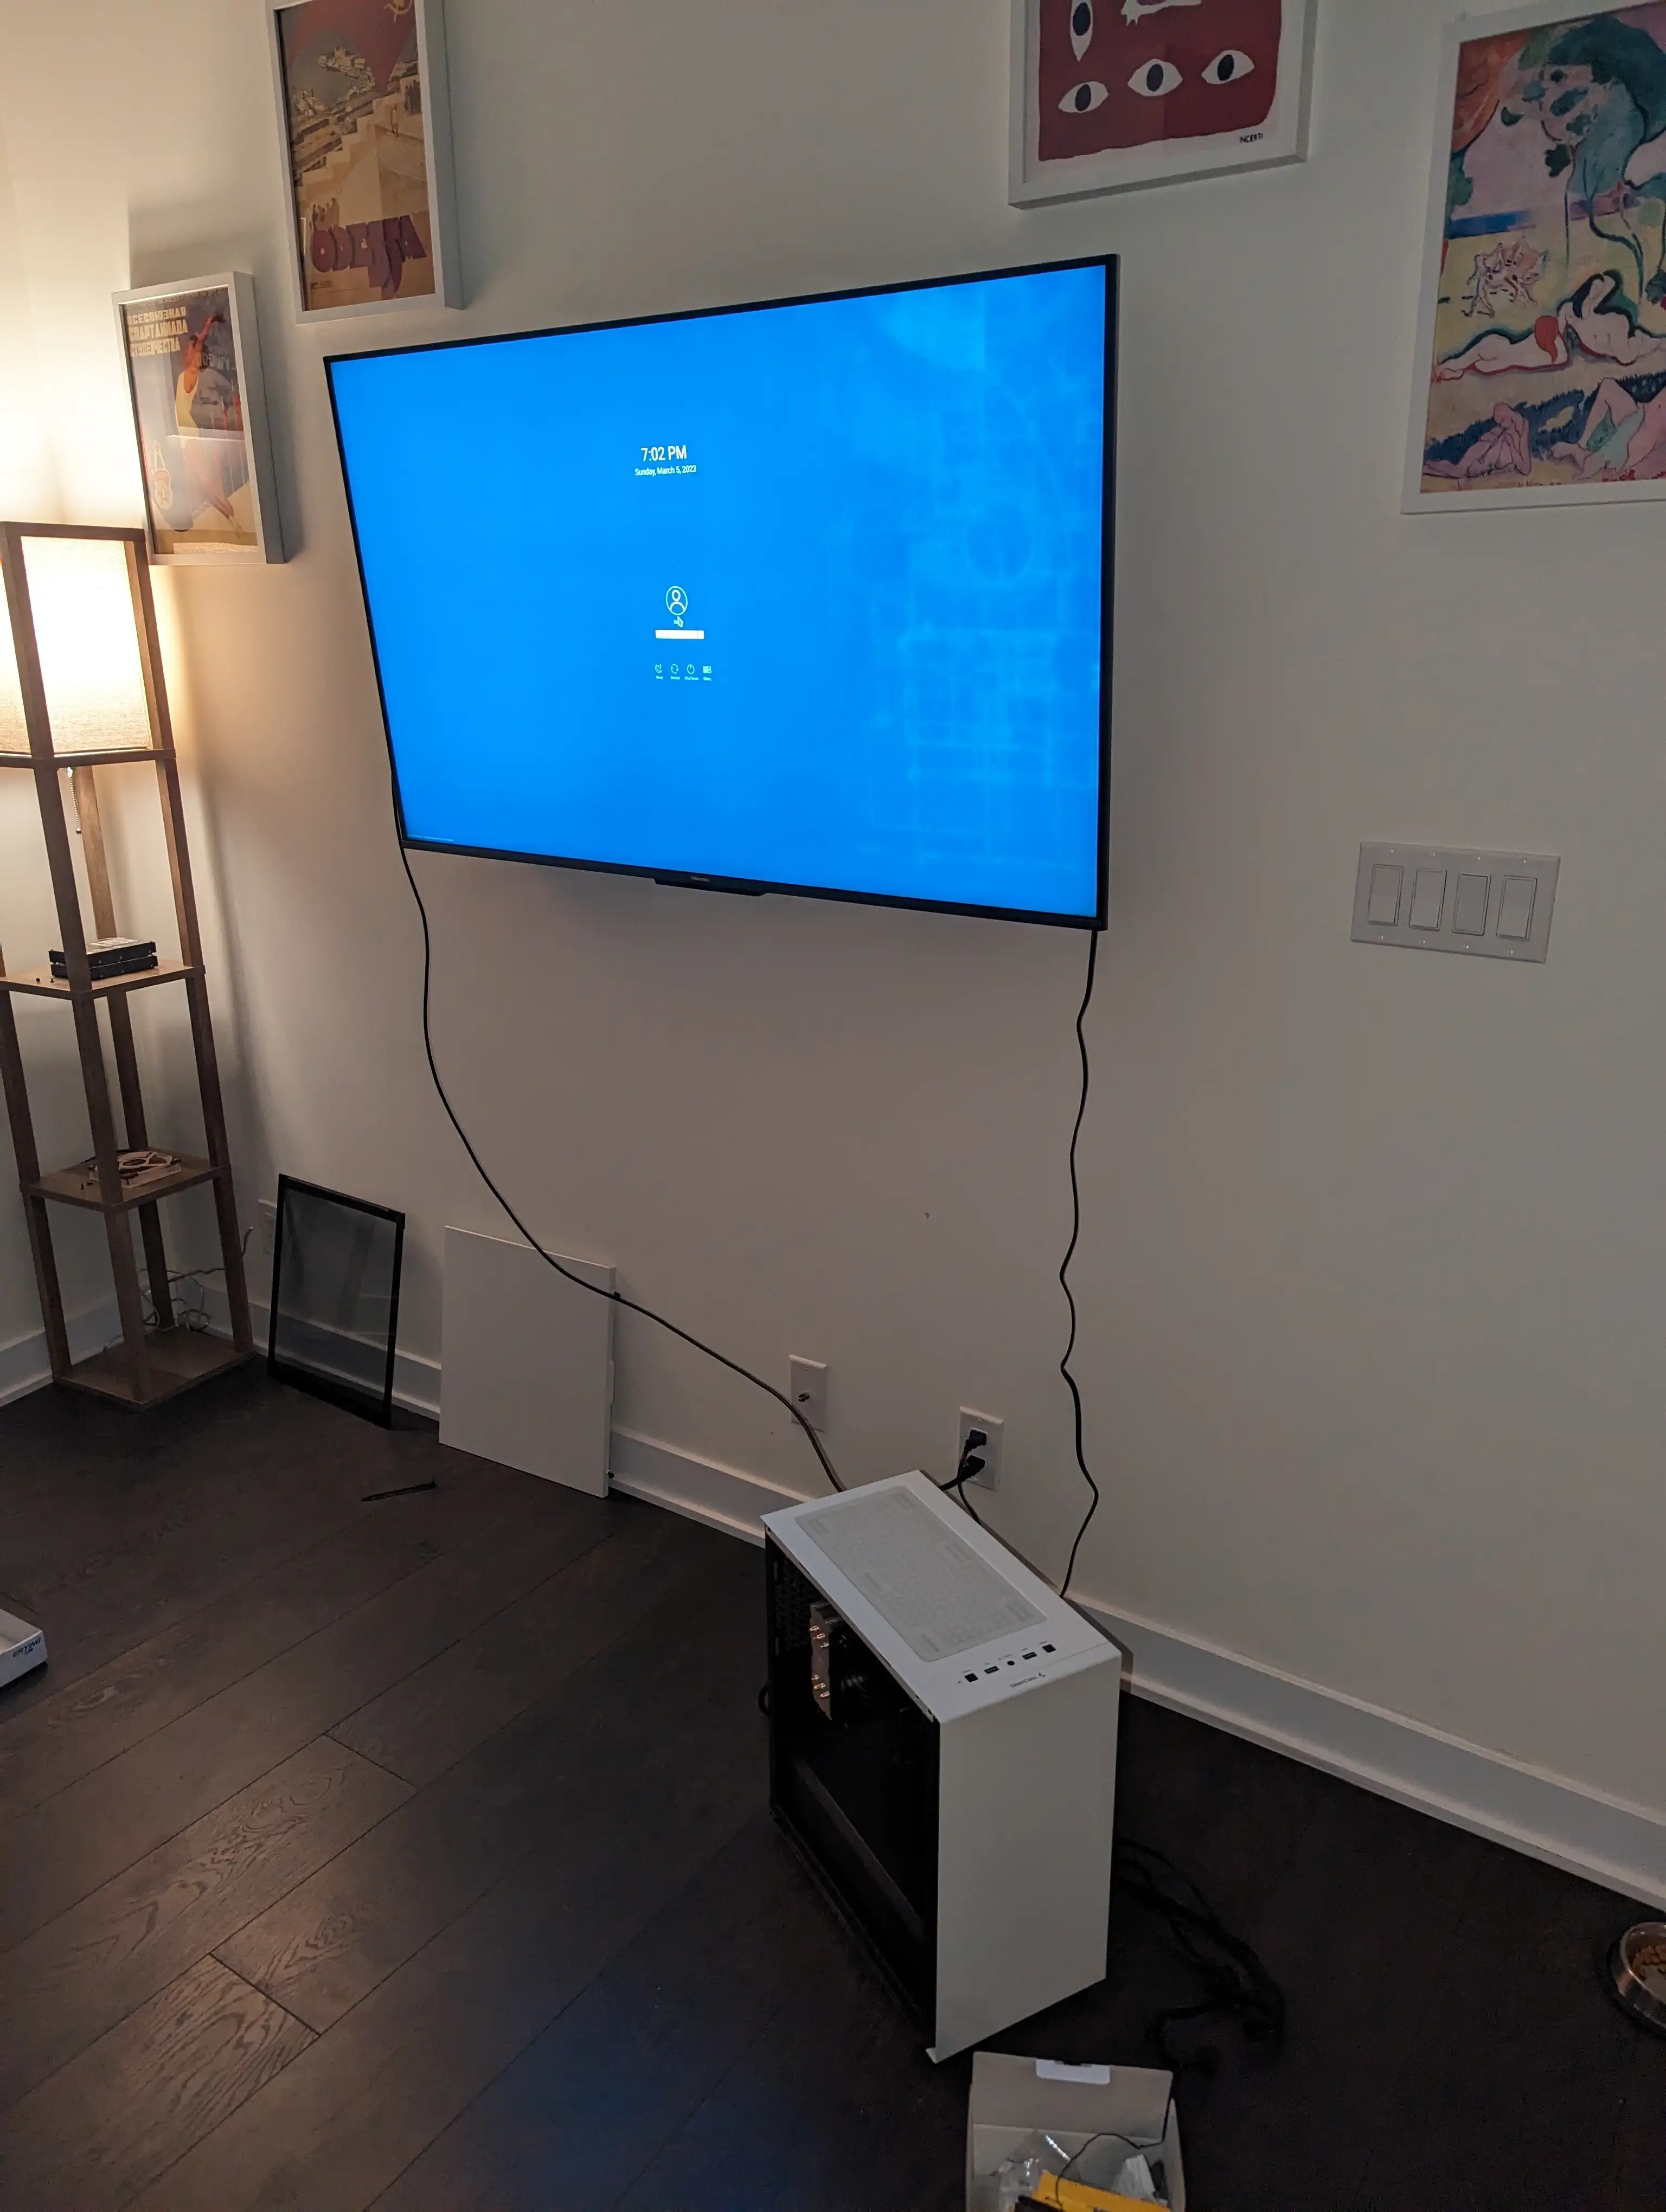 A photo of the assembled computer, connected to a television, which is showing a KDE Login screen.